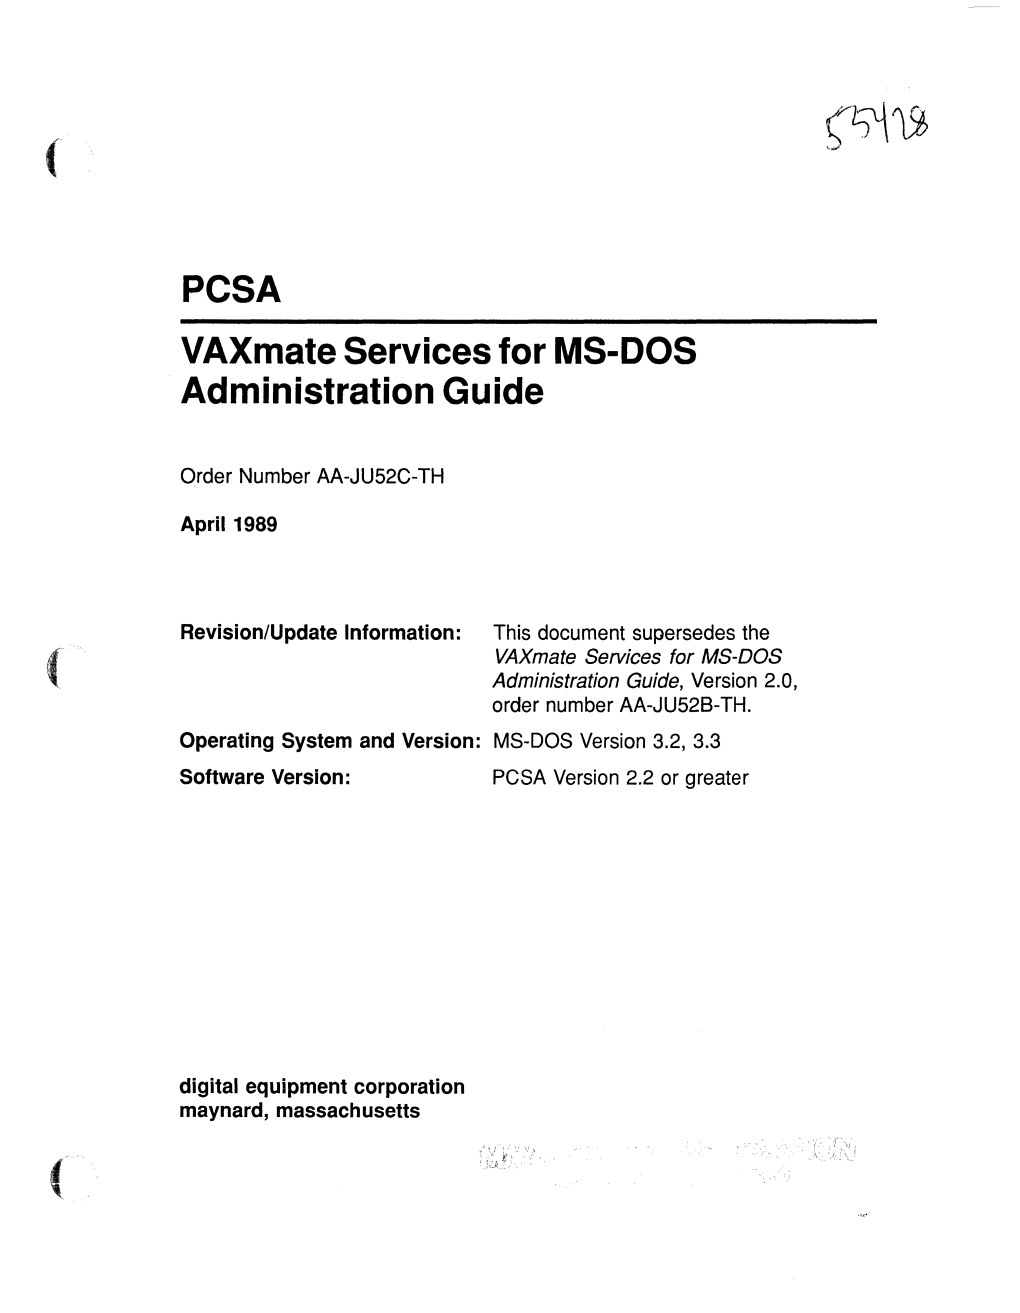 PCSA VAX Mate Services for MS-DOS Administration Guide